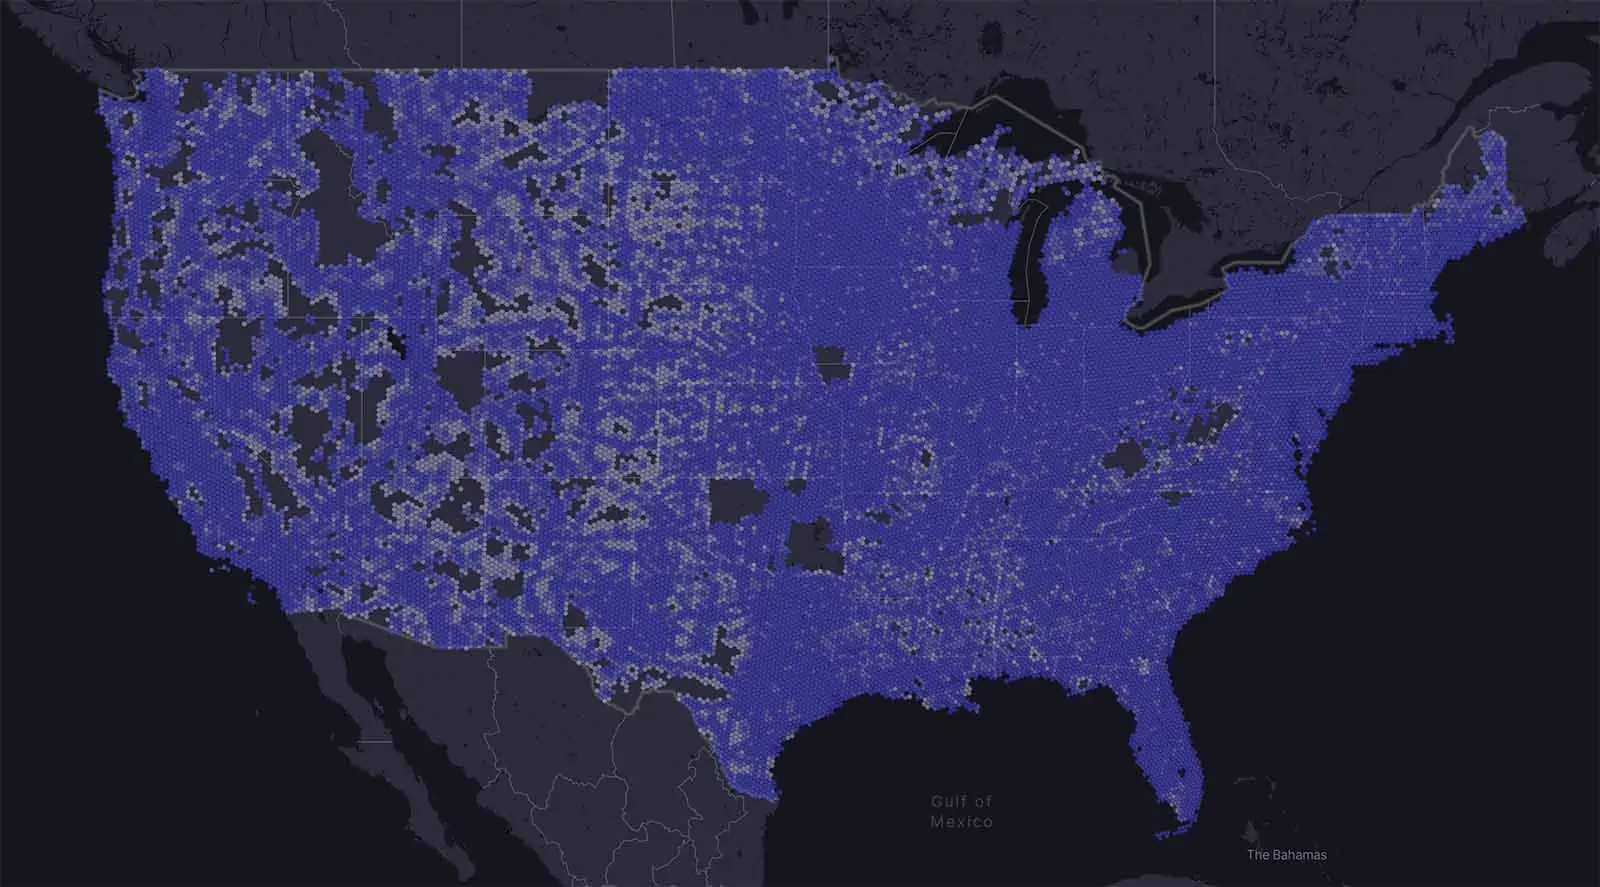 Visible LTE coverage map